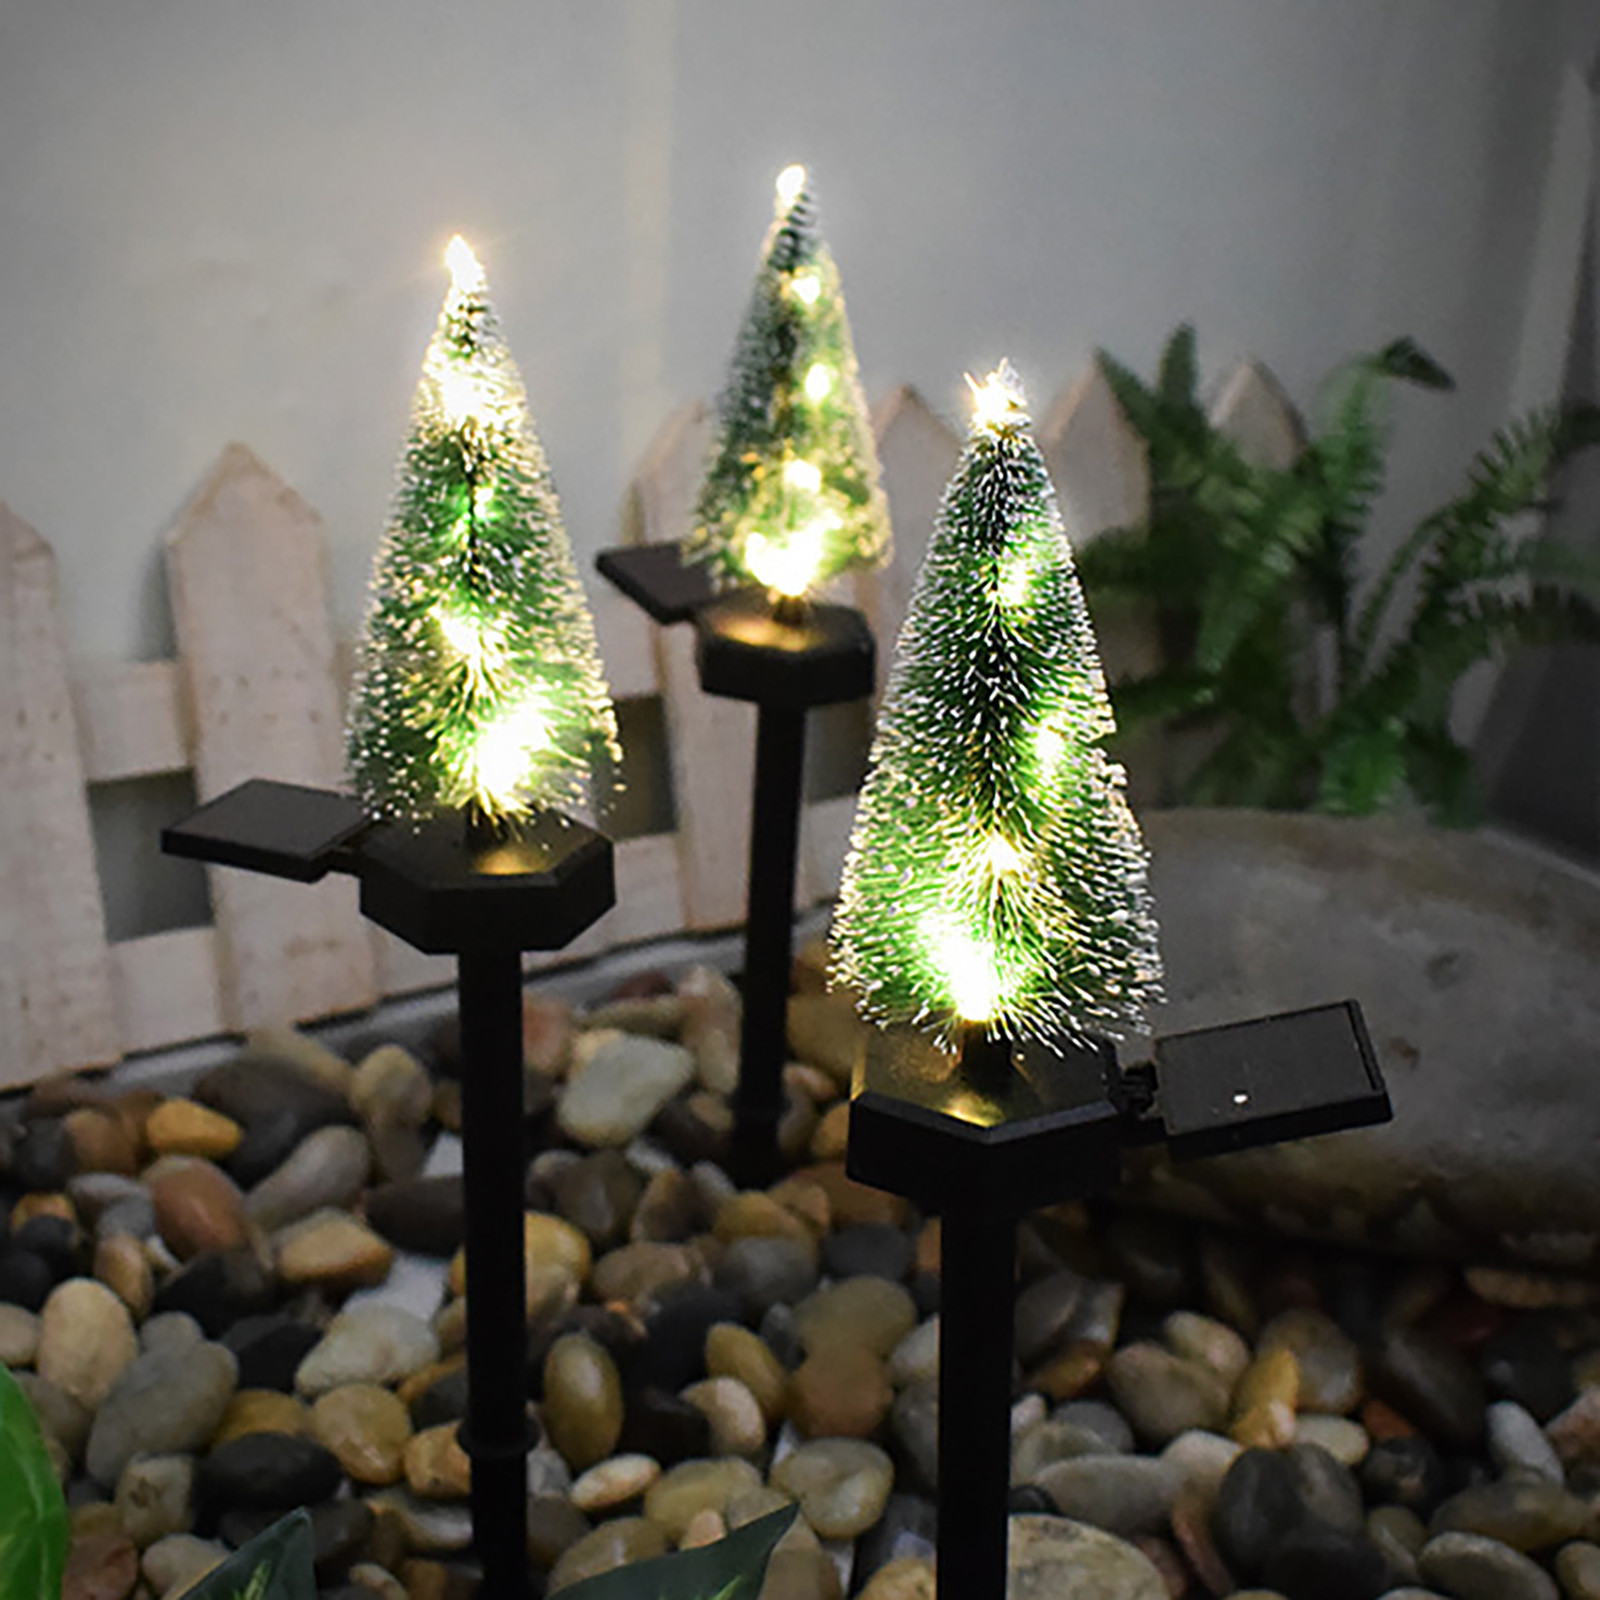 Christmas-Tree-Lights-Led-Solar-Light-For-Garden-Decoration-Lawn-Lamp-Outdoor-Home-Pathway-Bulb-Wate-1918433-9